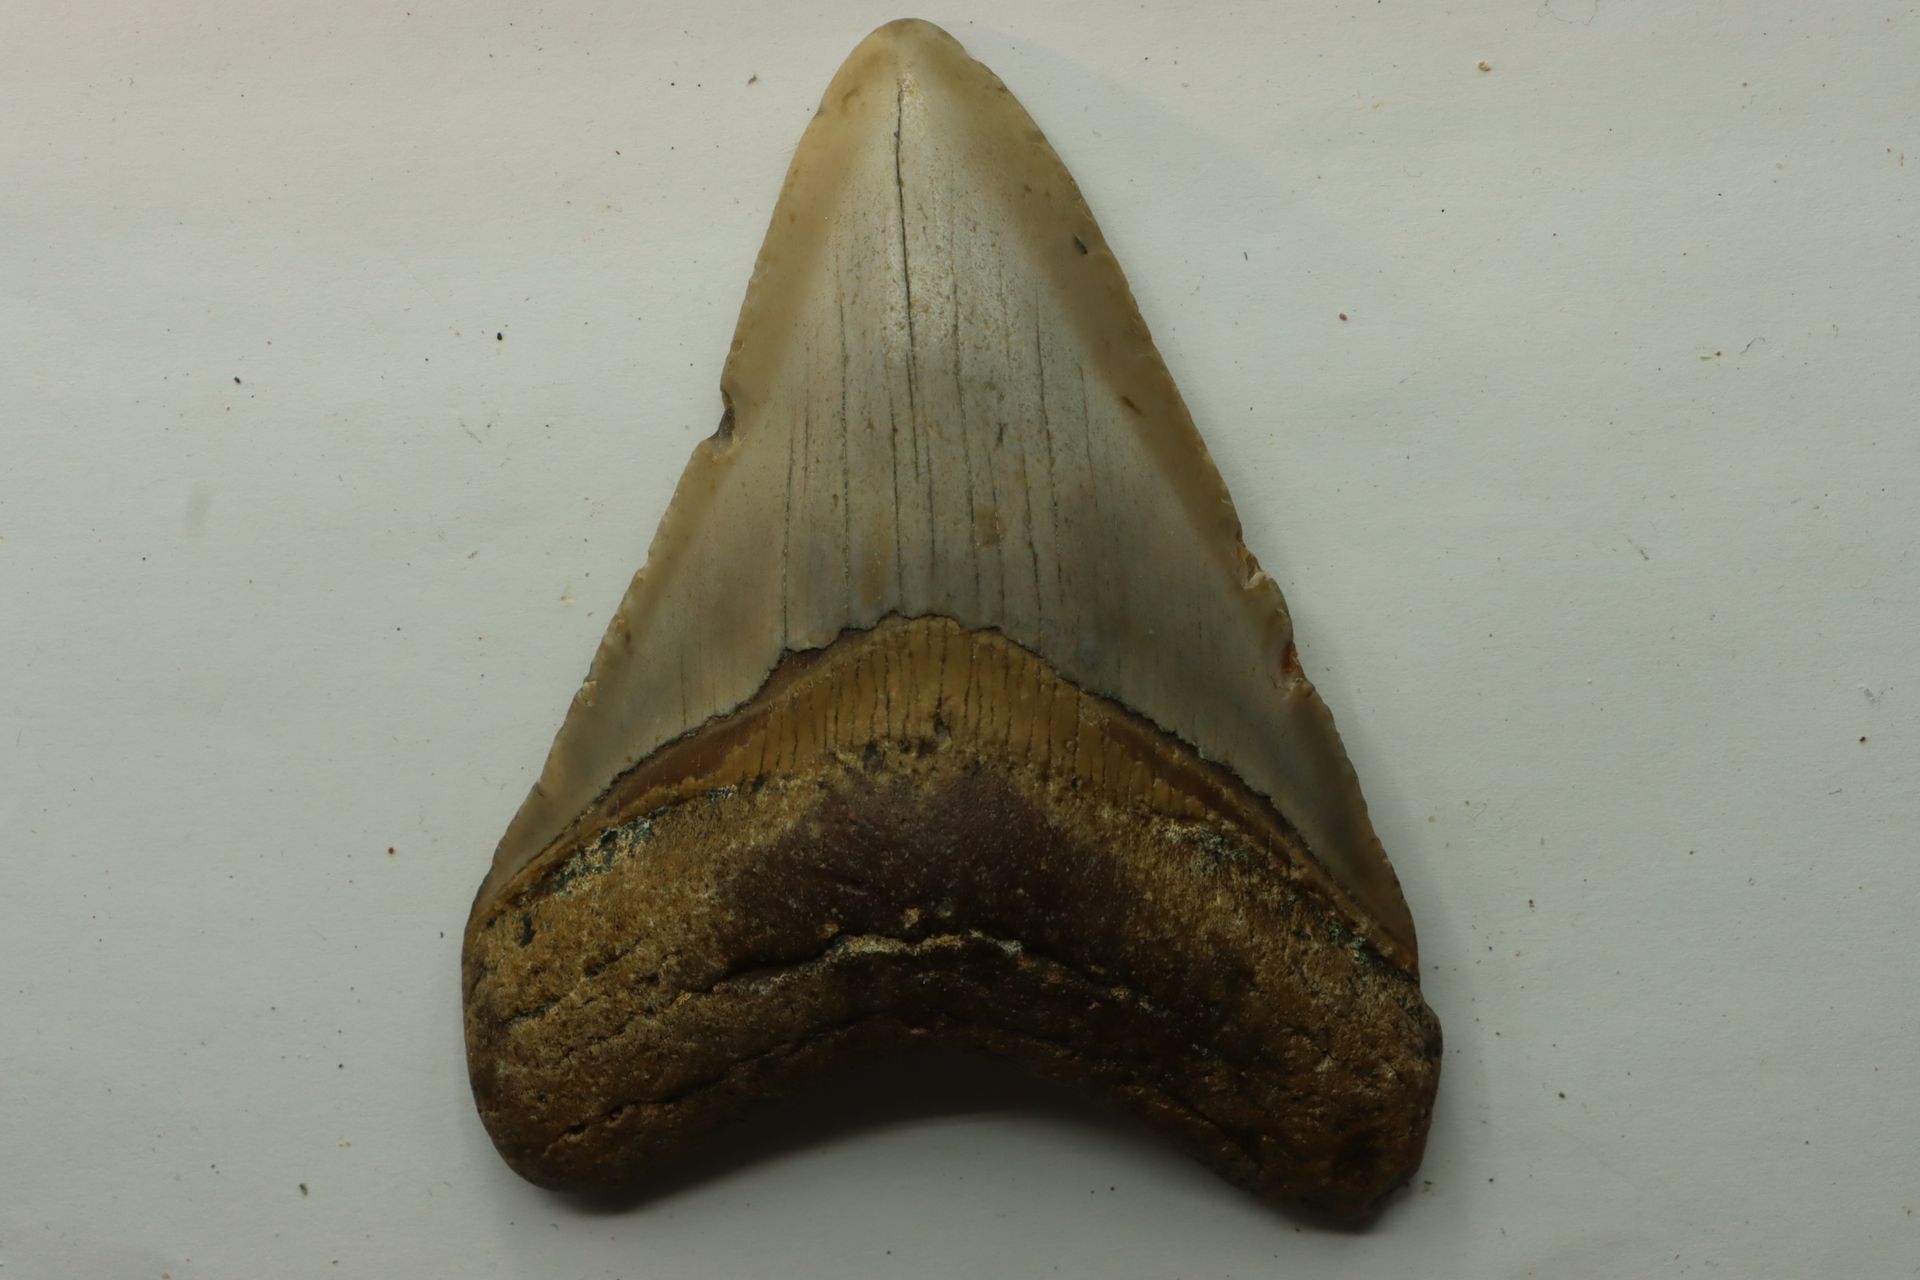 Dent de requin « carcharodon megalodon » – miocène des USA tooth of the mythical&hellip;